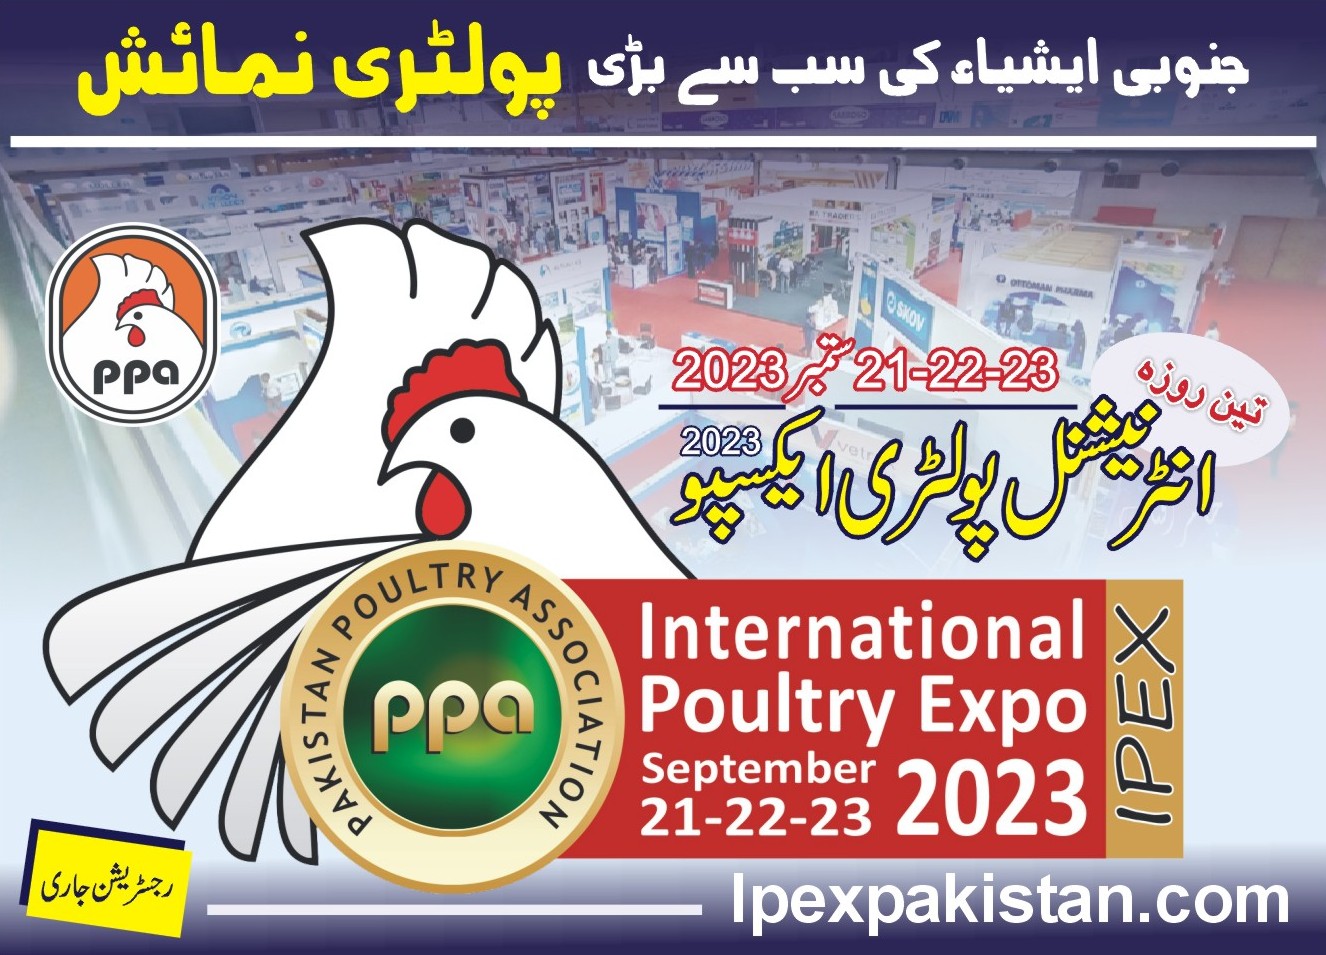 IPEX 2023 International Poultry Expo